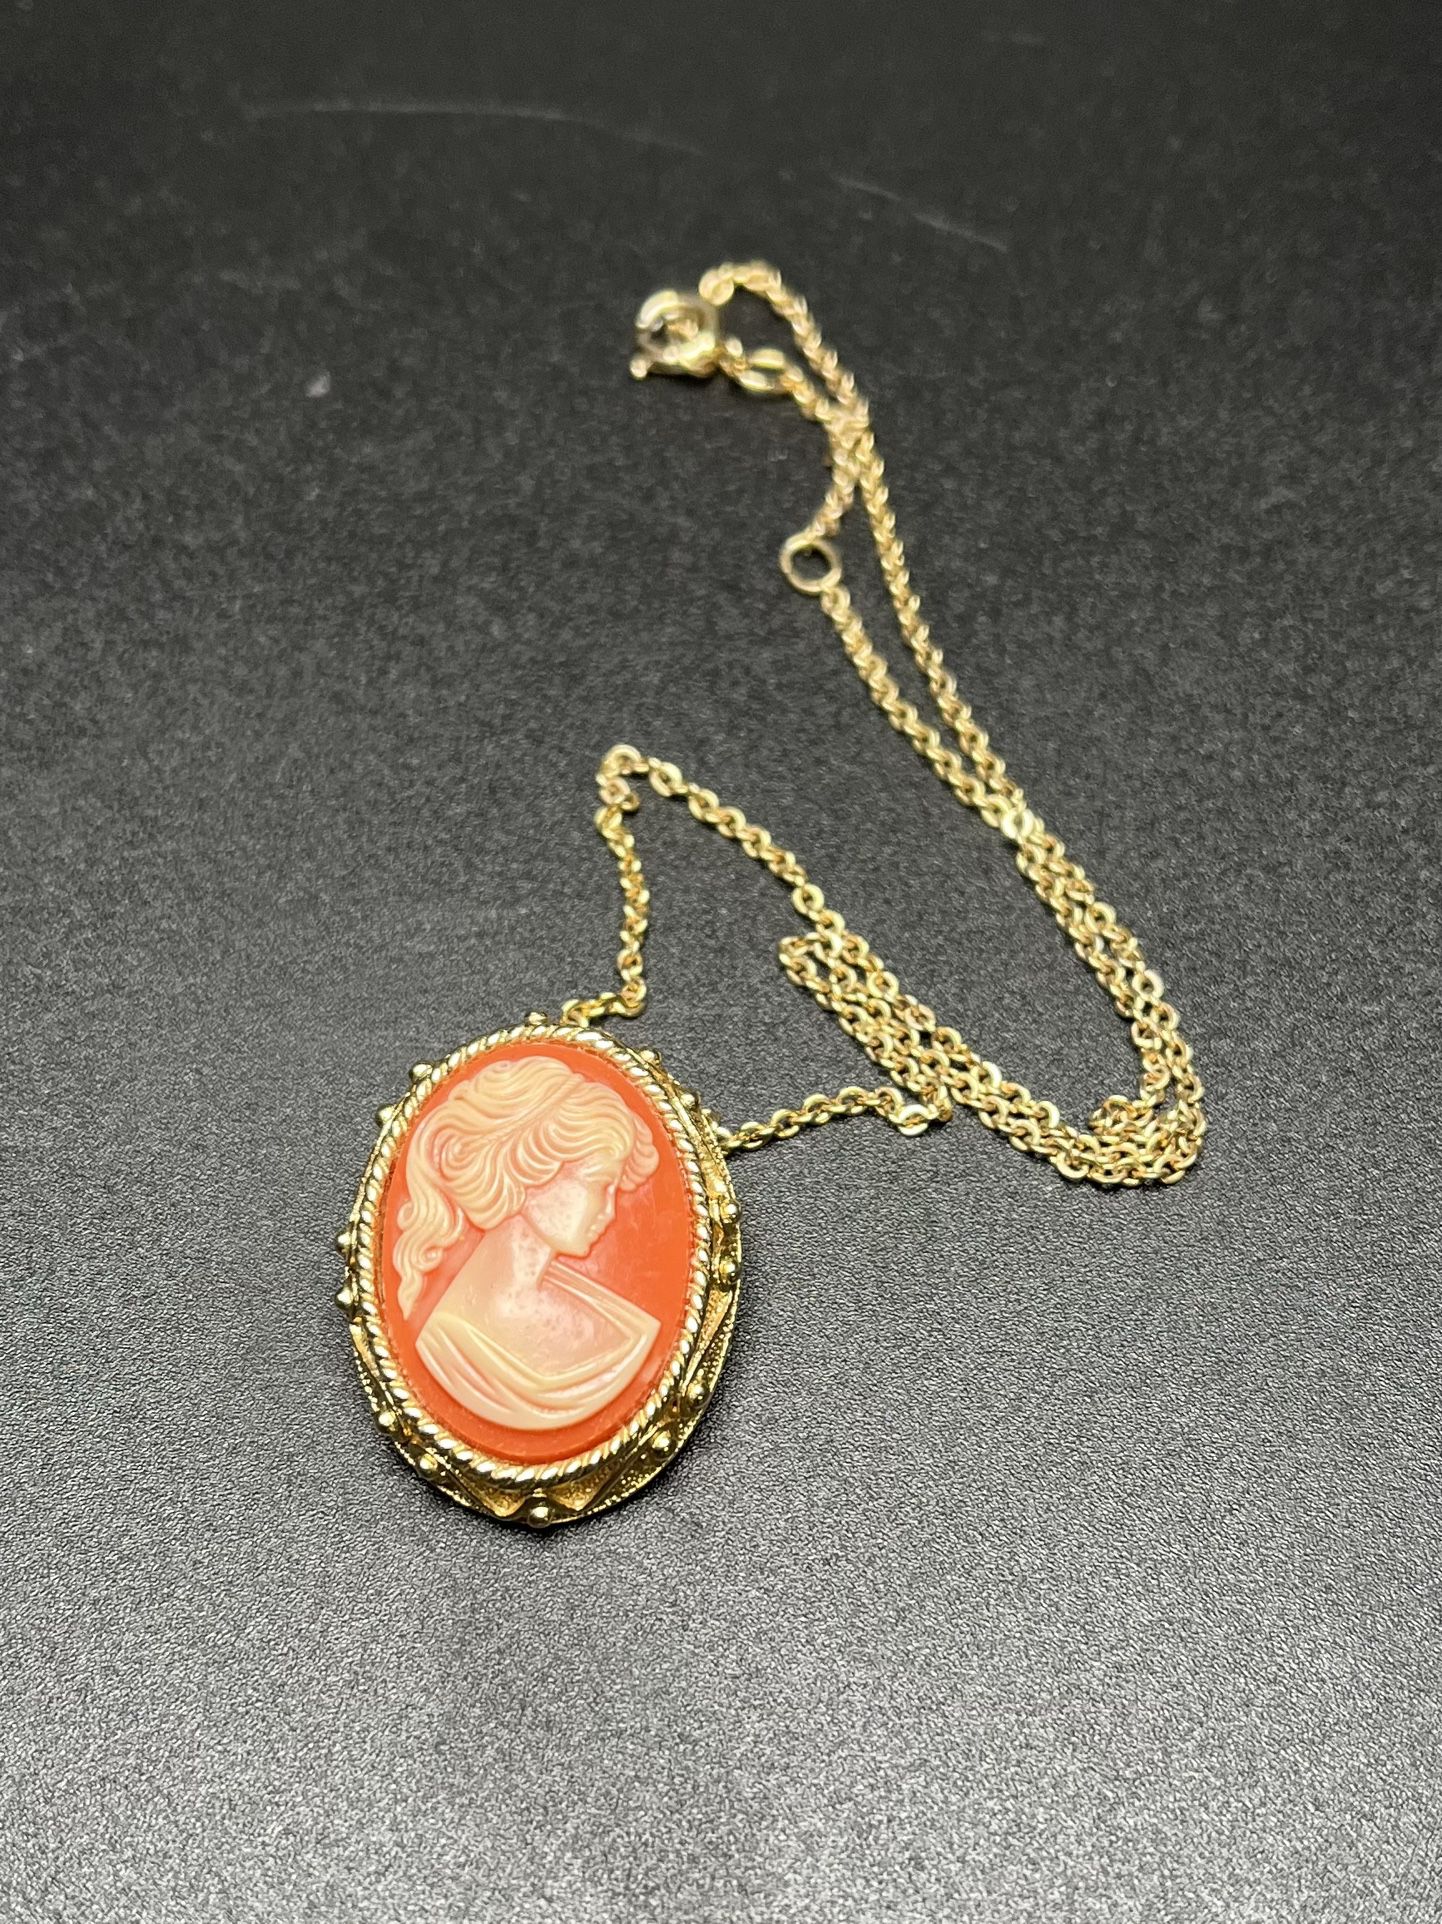 Vintage Sarah Coventry Cameo Brooch Necklace Pendant Slide Gold Tone Collector Costume Estate